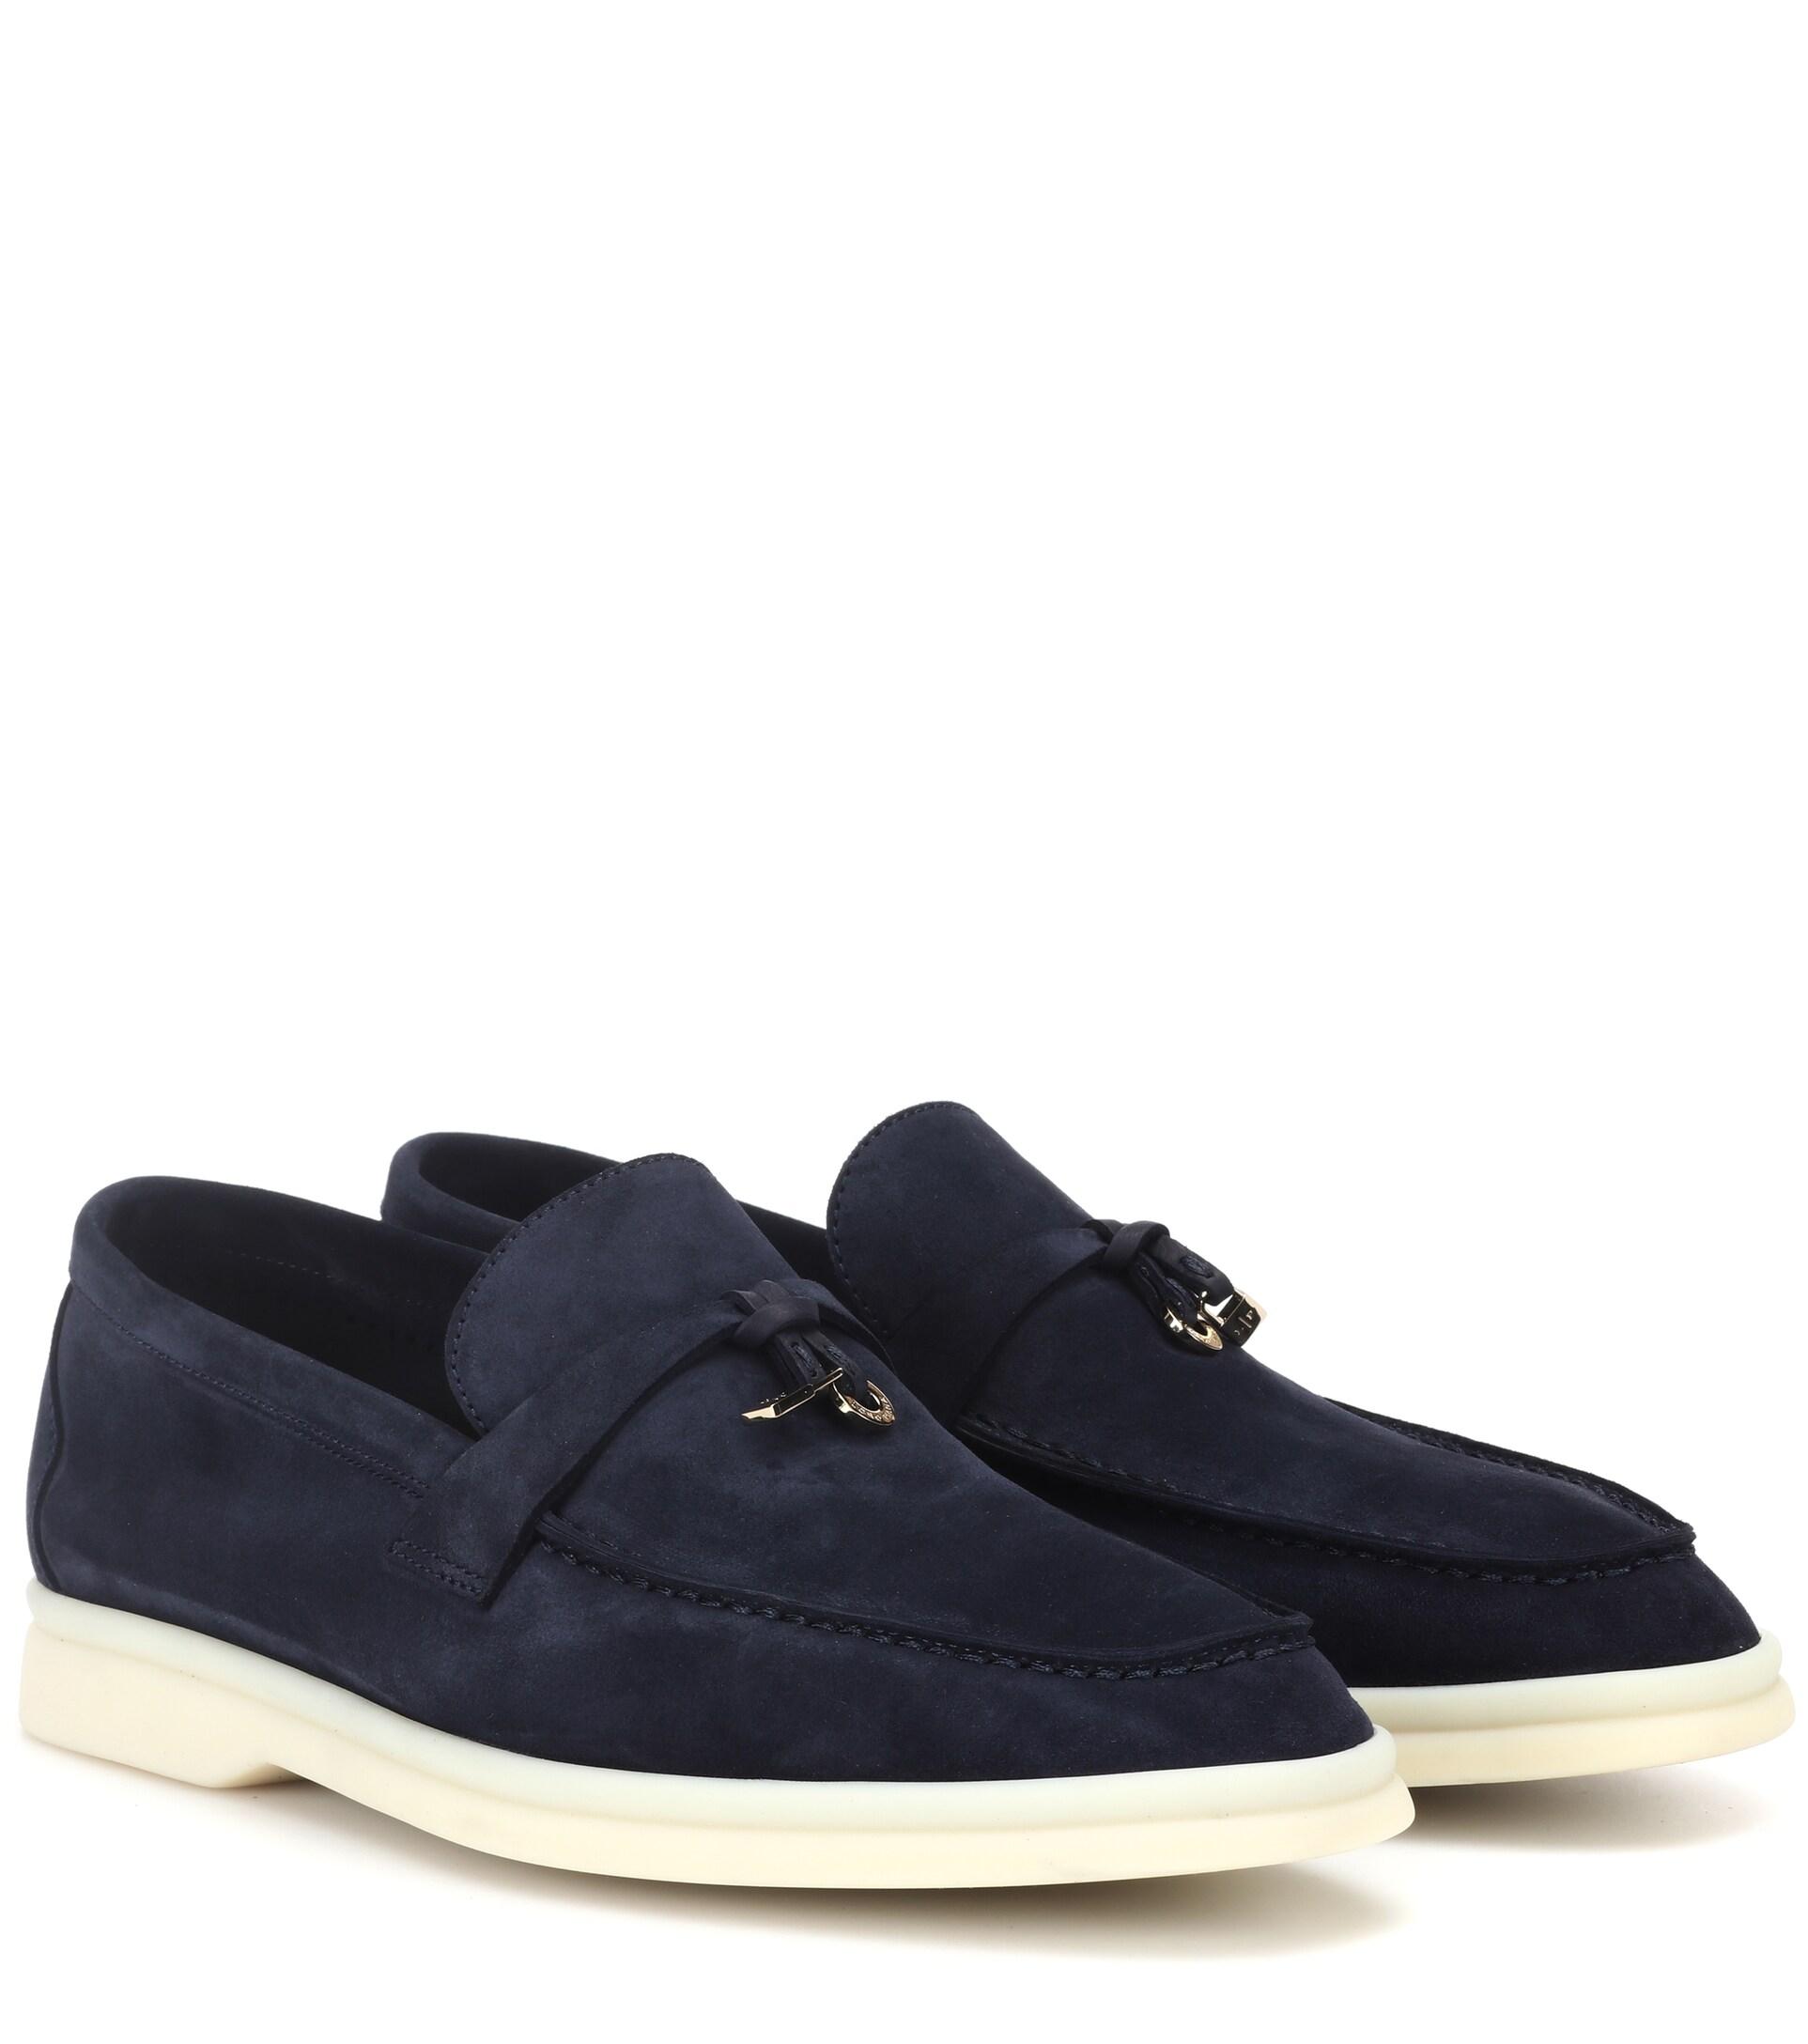 Loro Piana Summer Charms Walk Suede Loafers in Natural